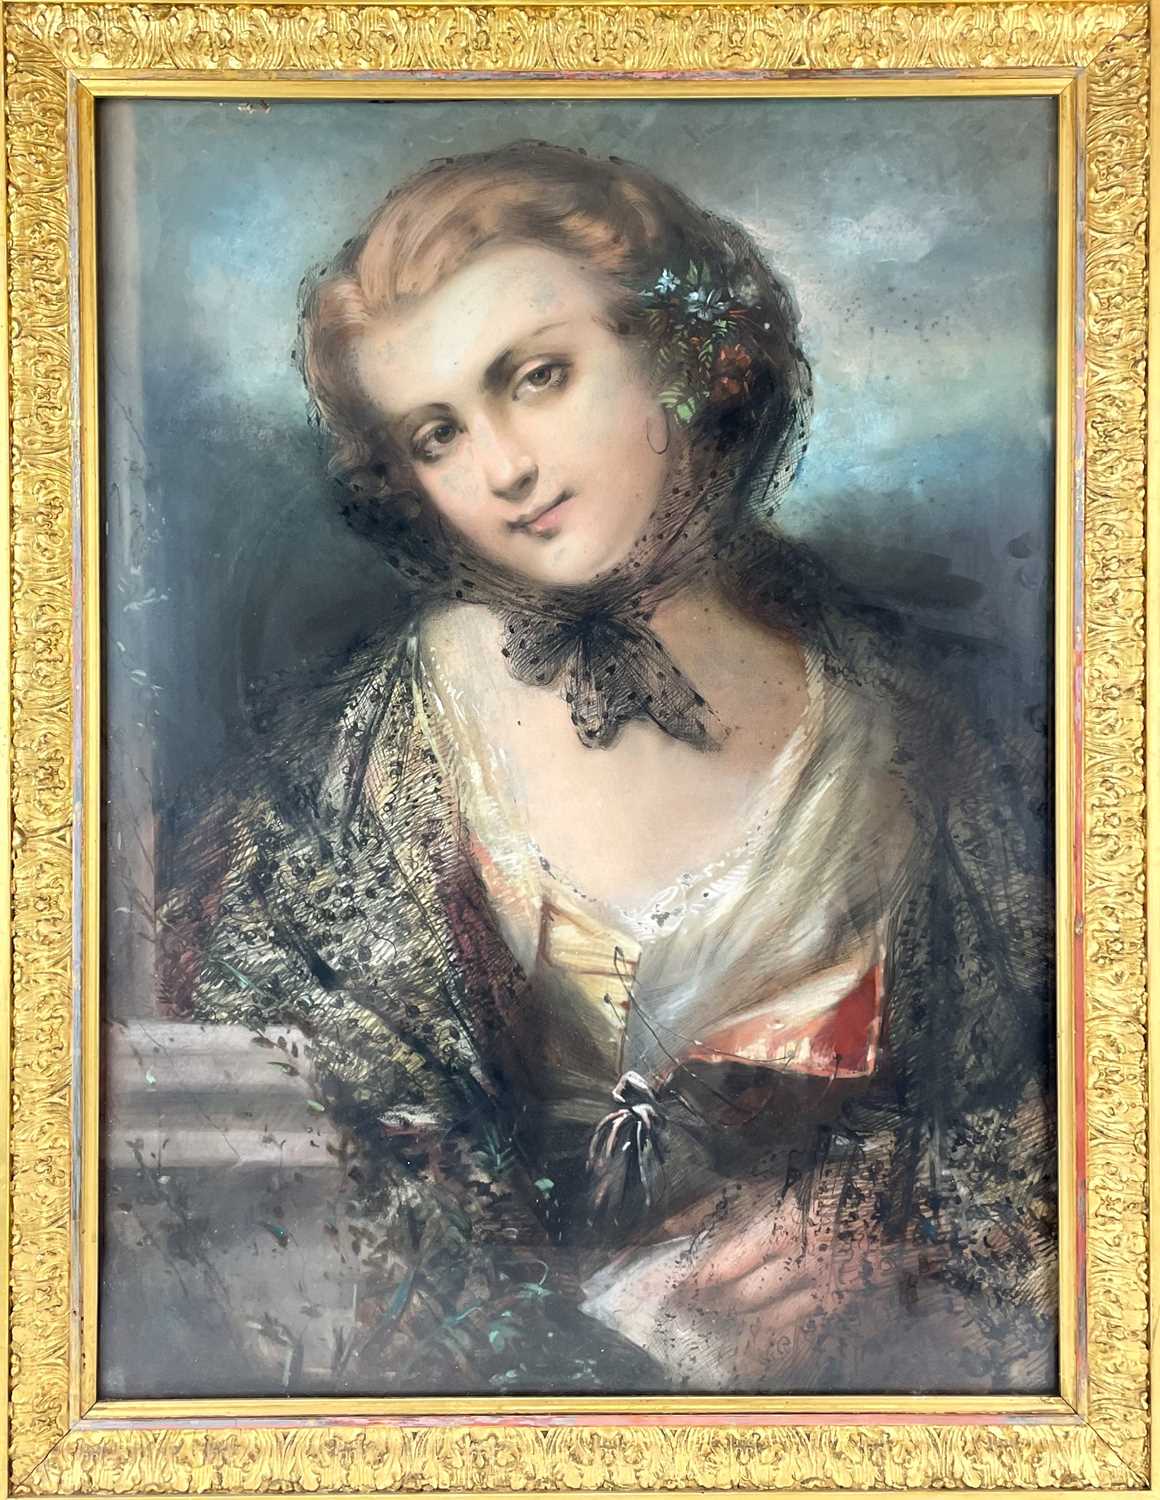 A 19th Century portrait overpainted using pastel - Image 2 of 3